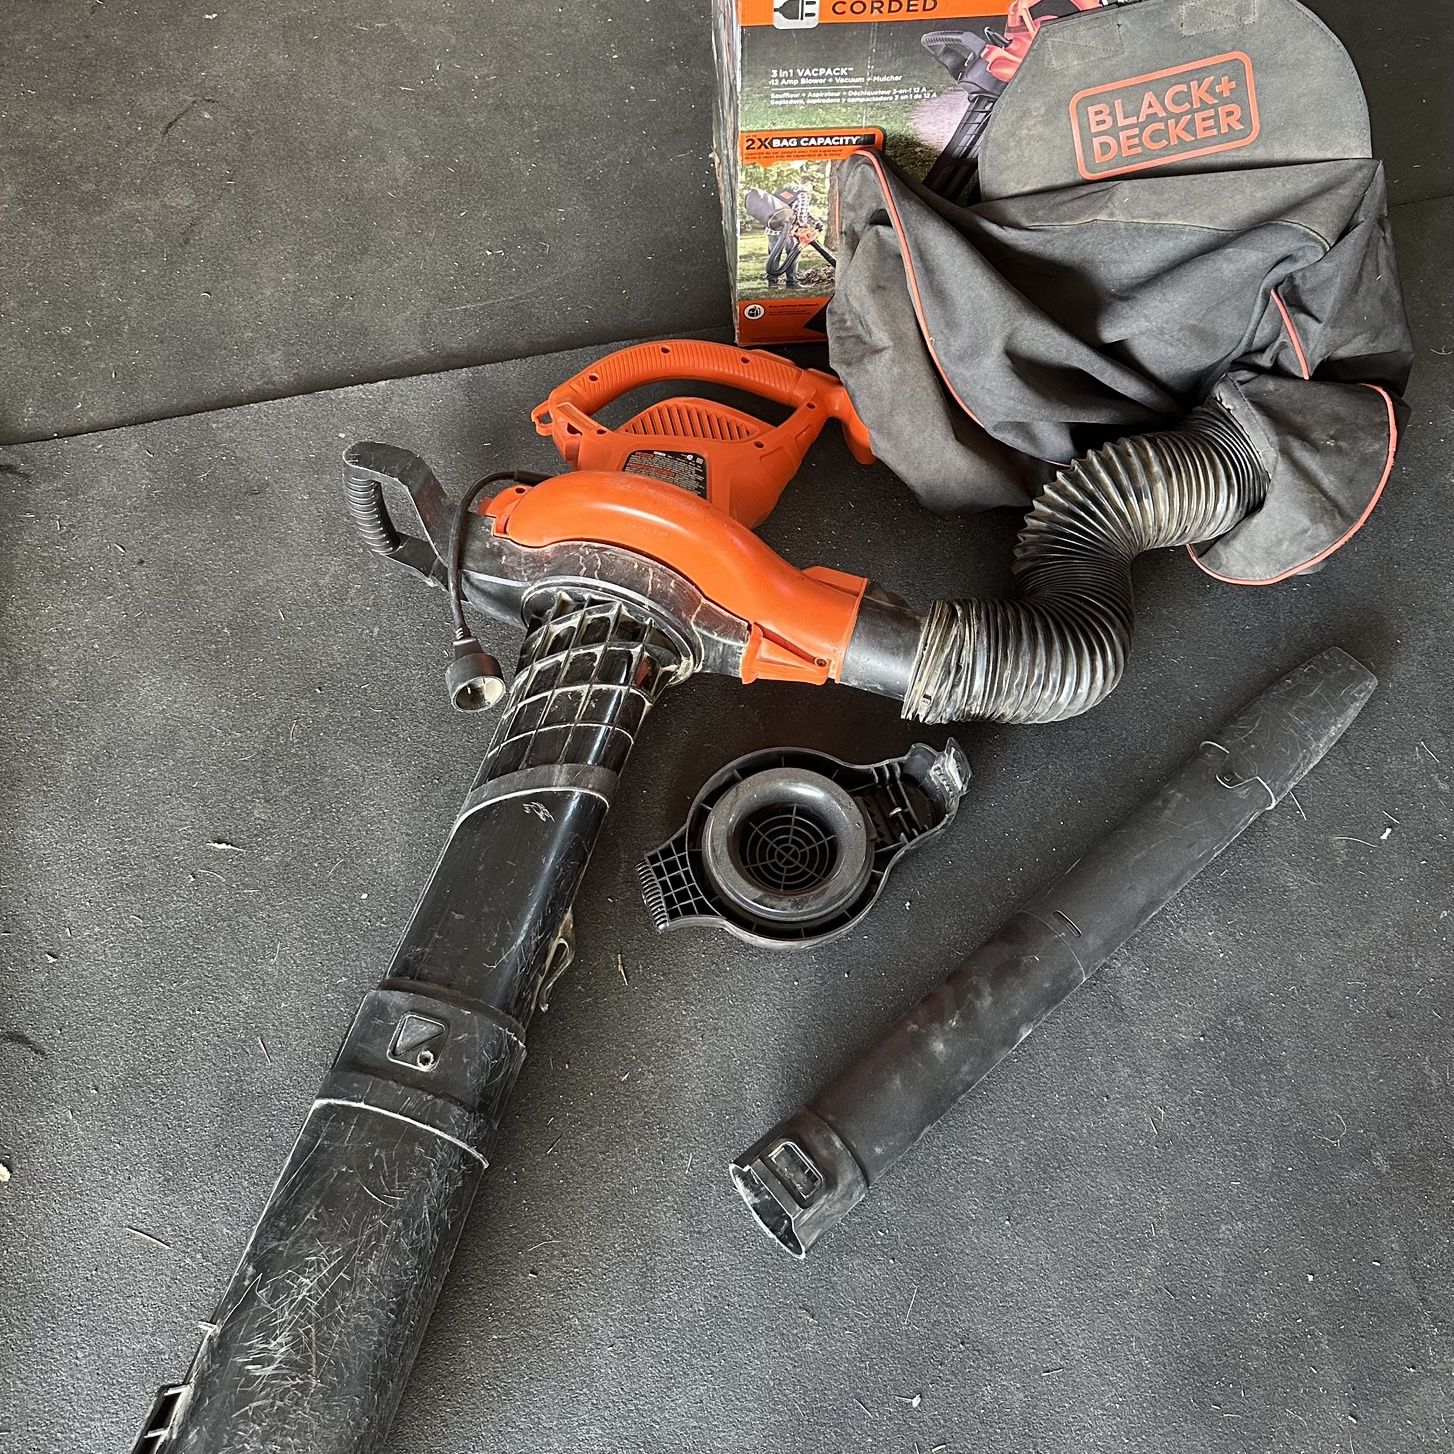 Black & Decker Corded Electric Leaf Blower/Vacuum for Sale in Acton, CA -  OfferUp